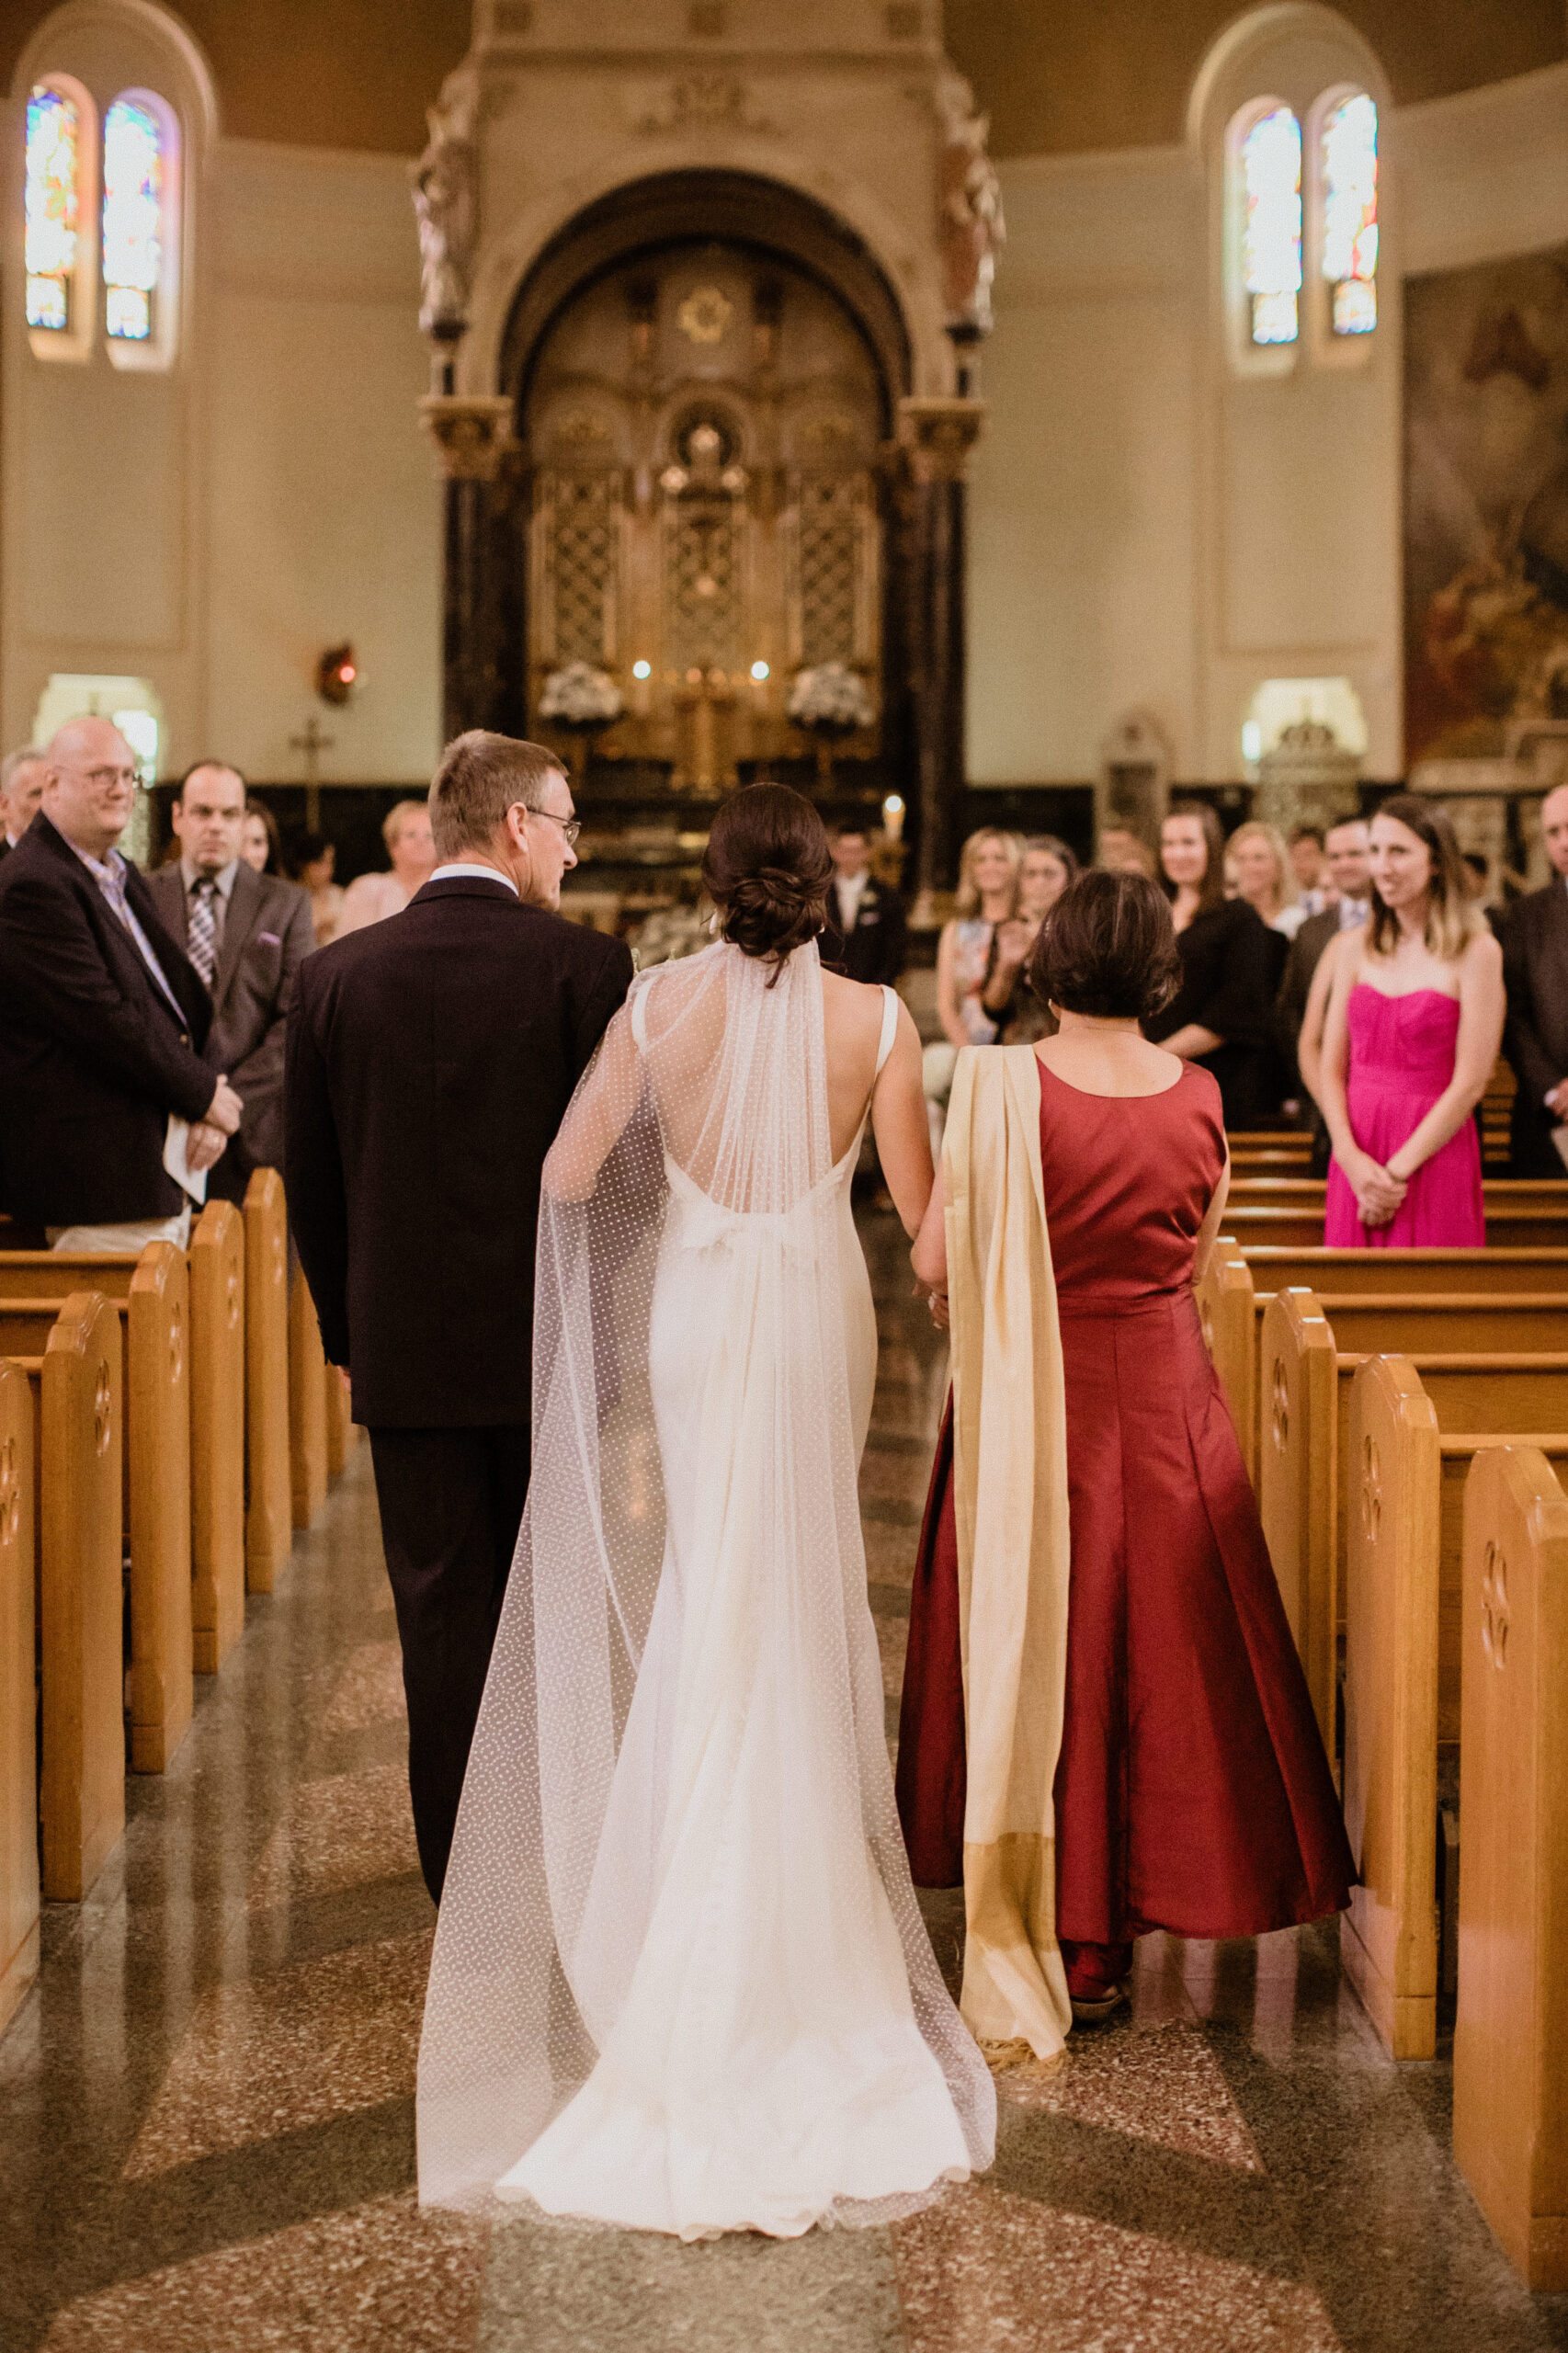 Bride enters and is walked down the aisle by her mother and father